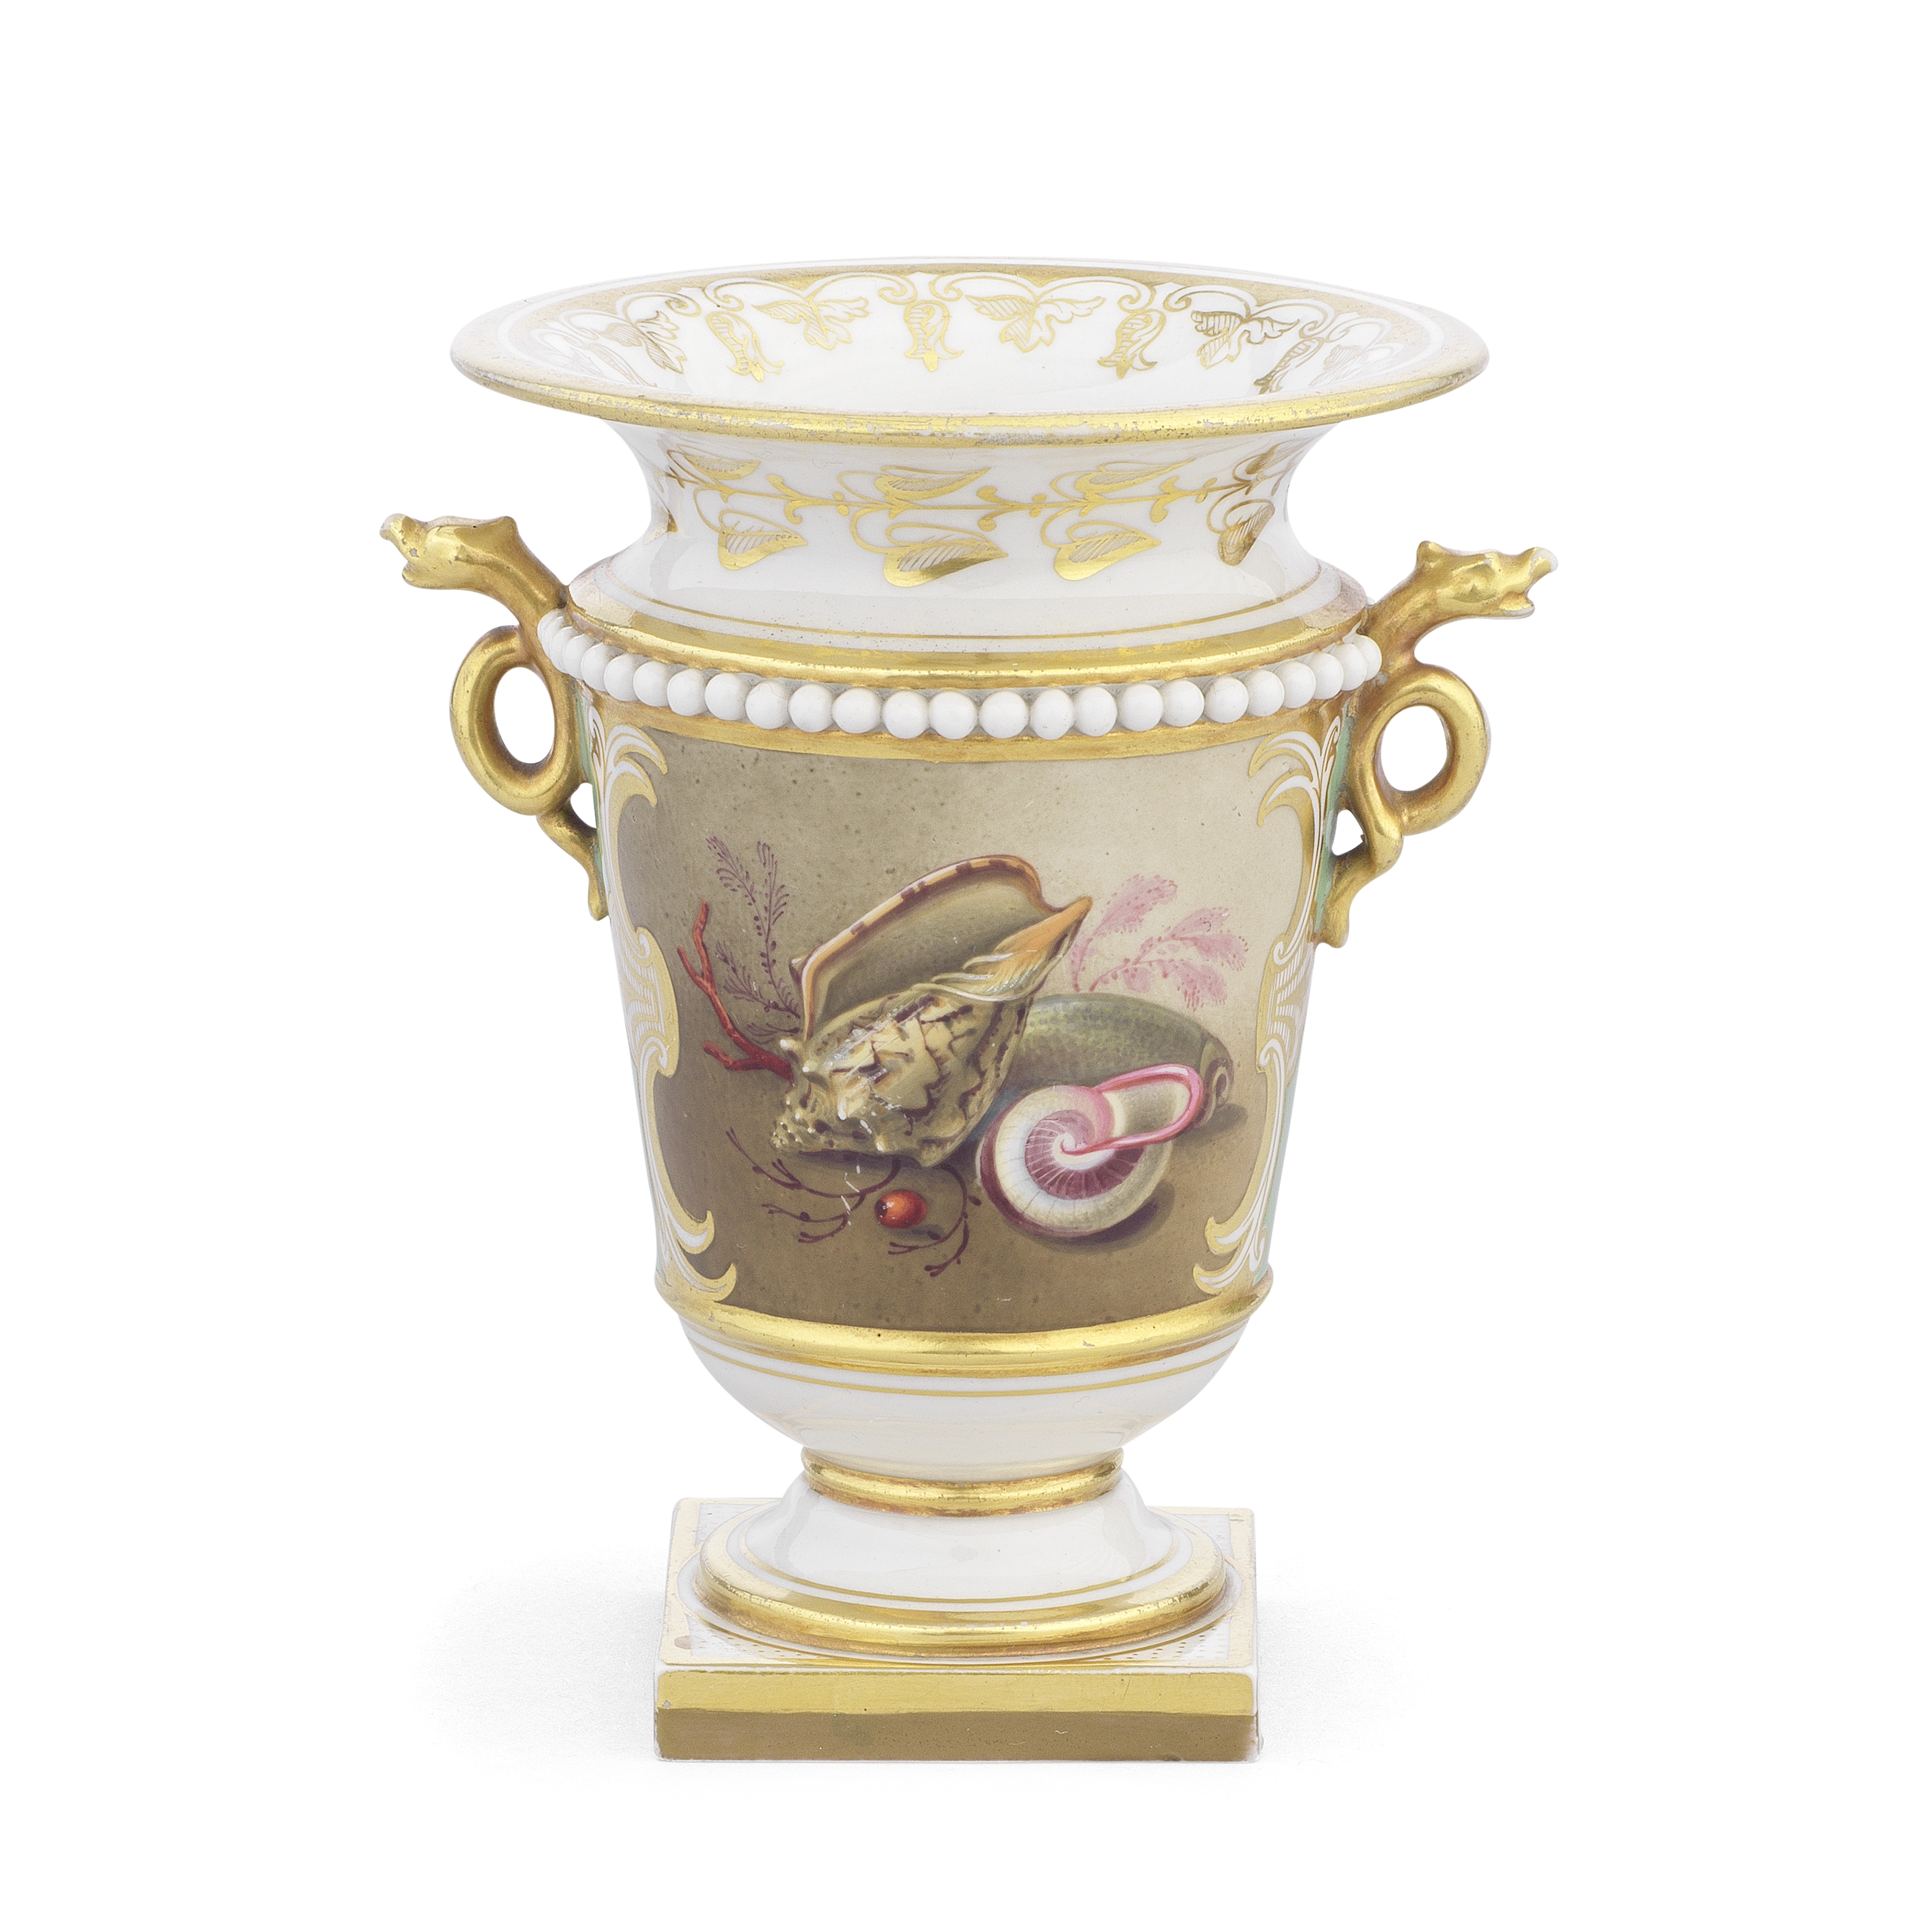 A Flight, Barr and Barr Worcester vase, circa 1820